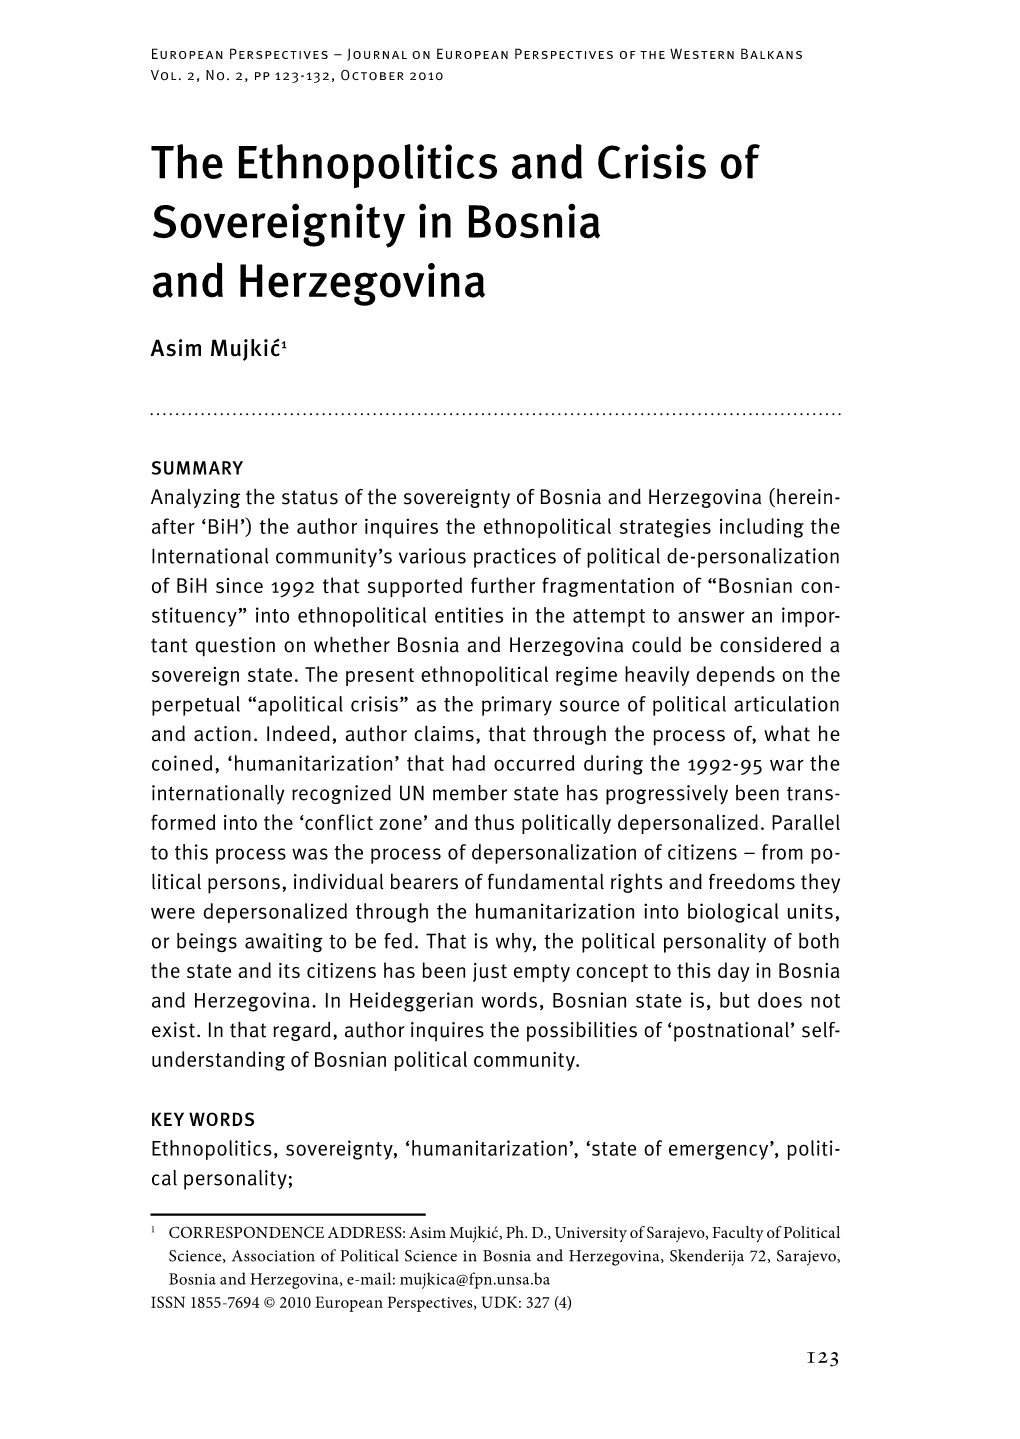 The Ethnopolitics and Crisis of Sovereignity in Bosnia and Herzegovina